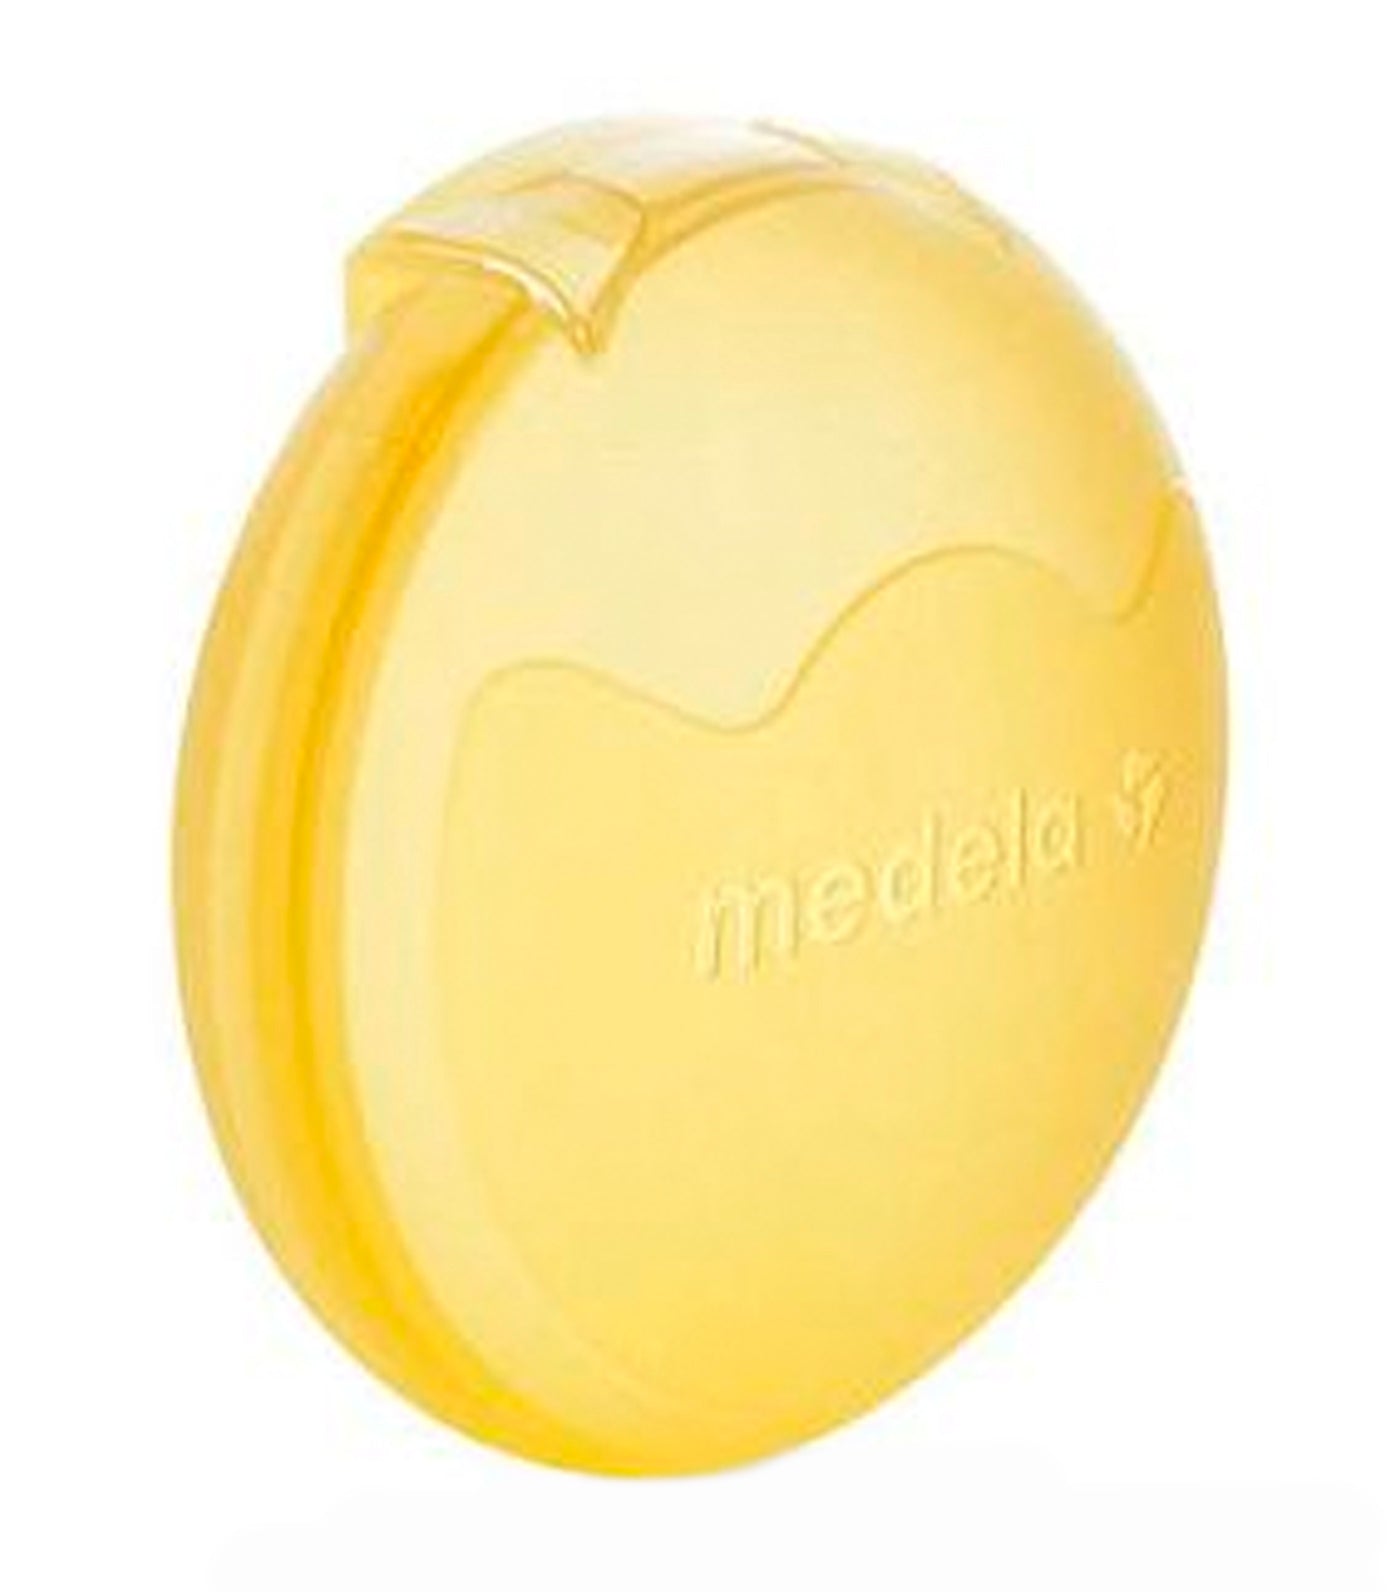 medela contact nipple shields with carrying case (large)